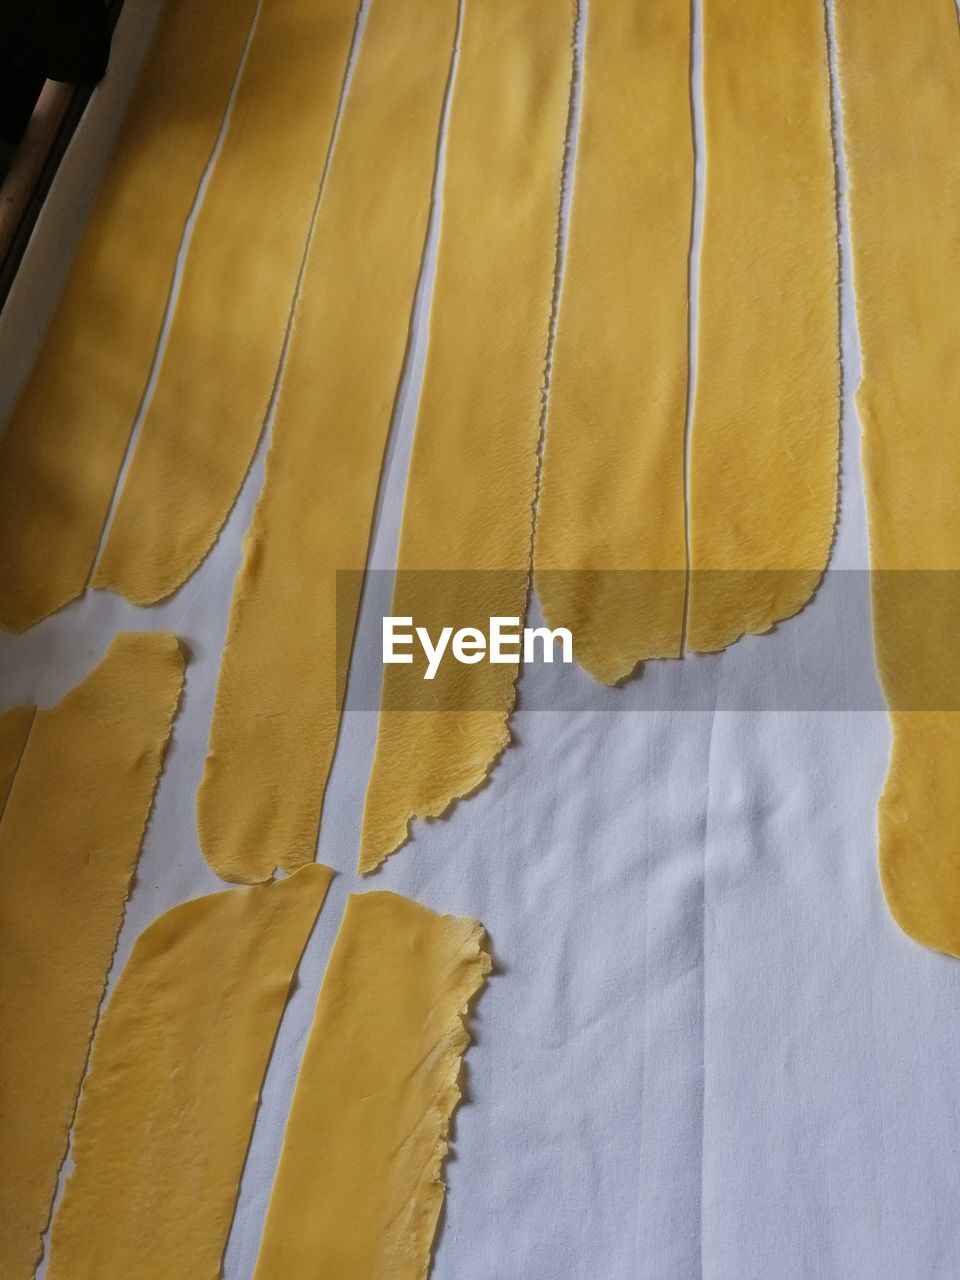 FULL FRAME SHOT OF YELLOW PAPER HANGING ON CLOTHESLINE